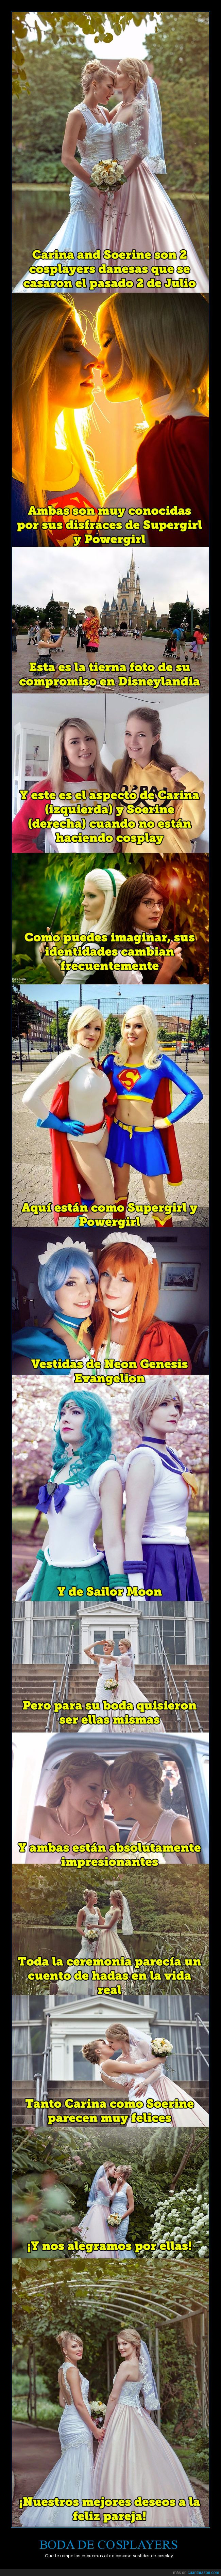 boda,chicas,cosplayers